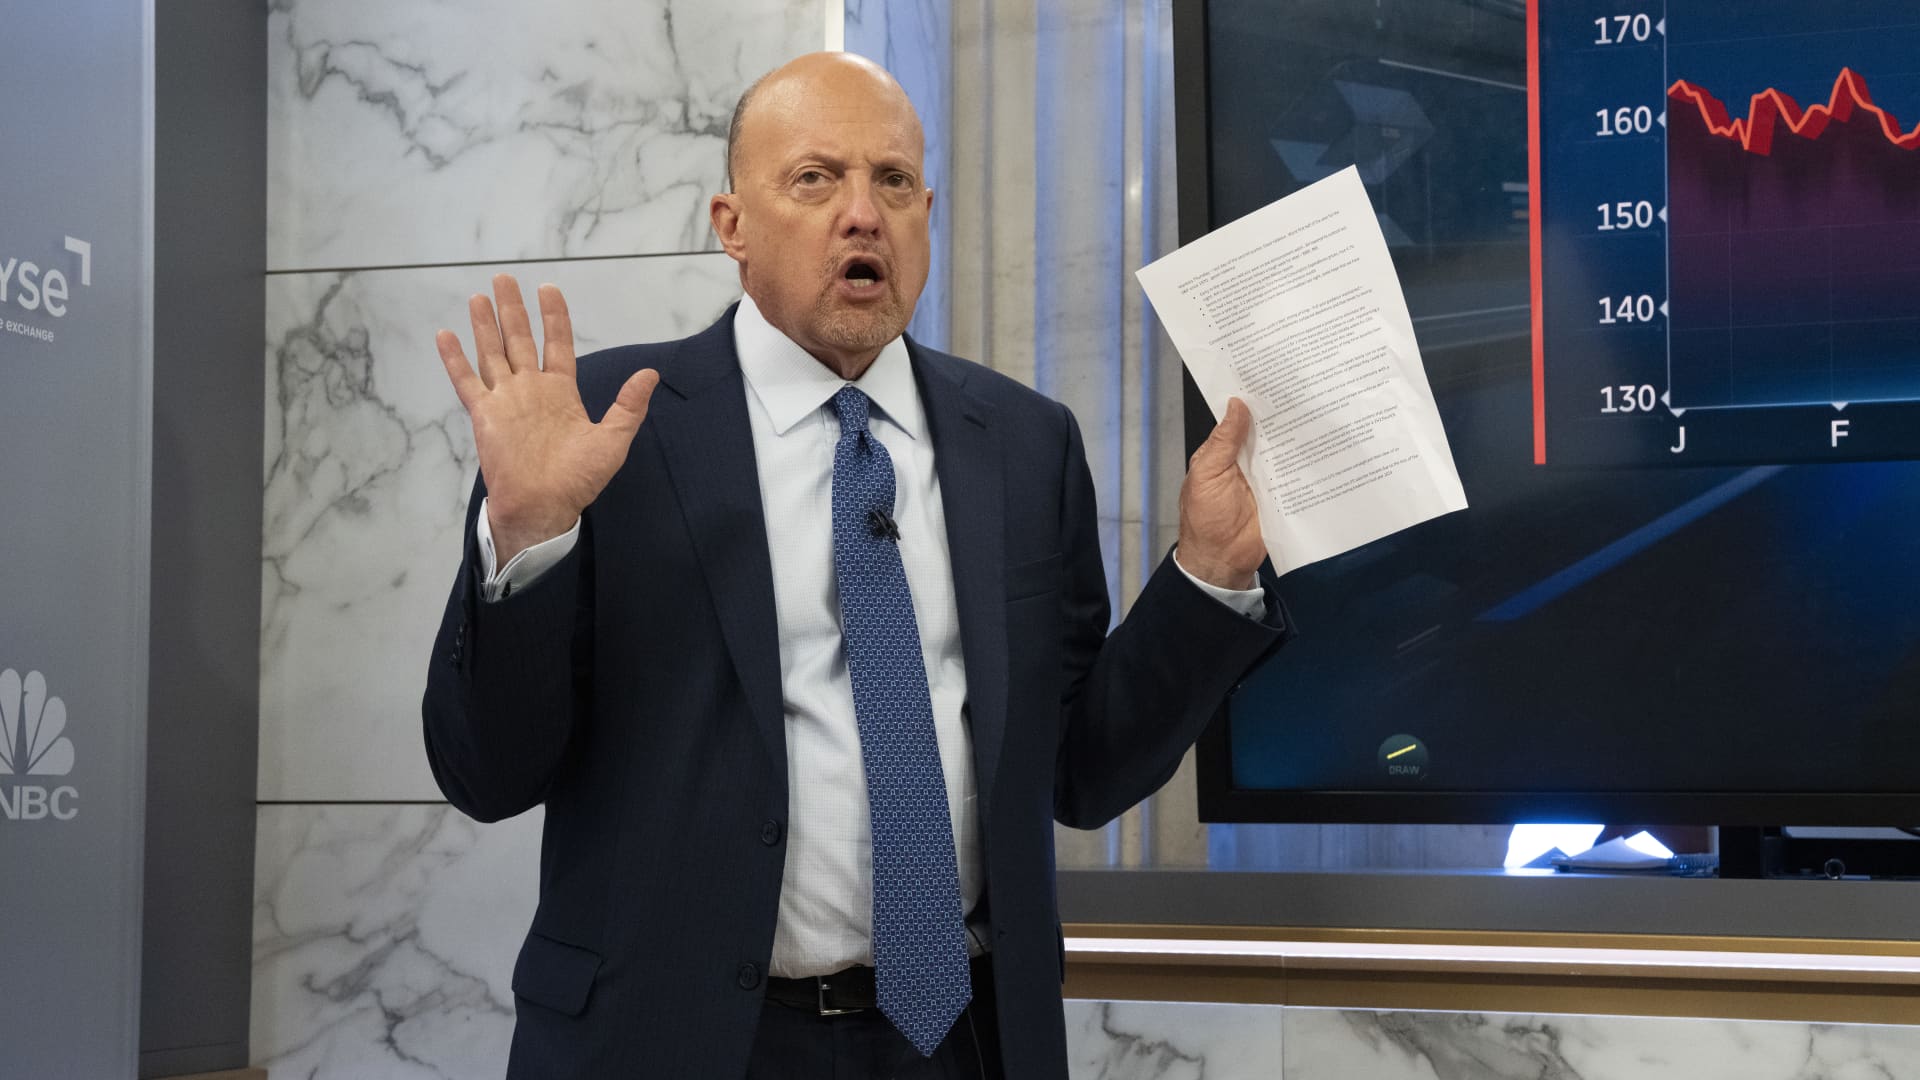 Jim Cramer's Investing Club meeting Friday: Overbought, Wells Fargo